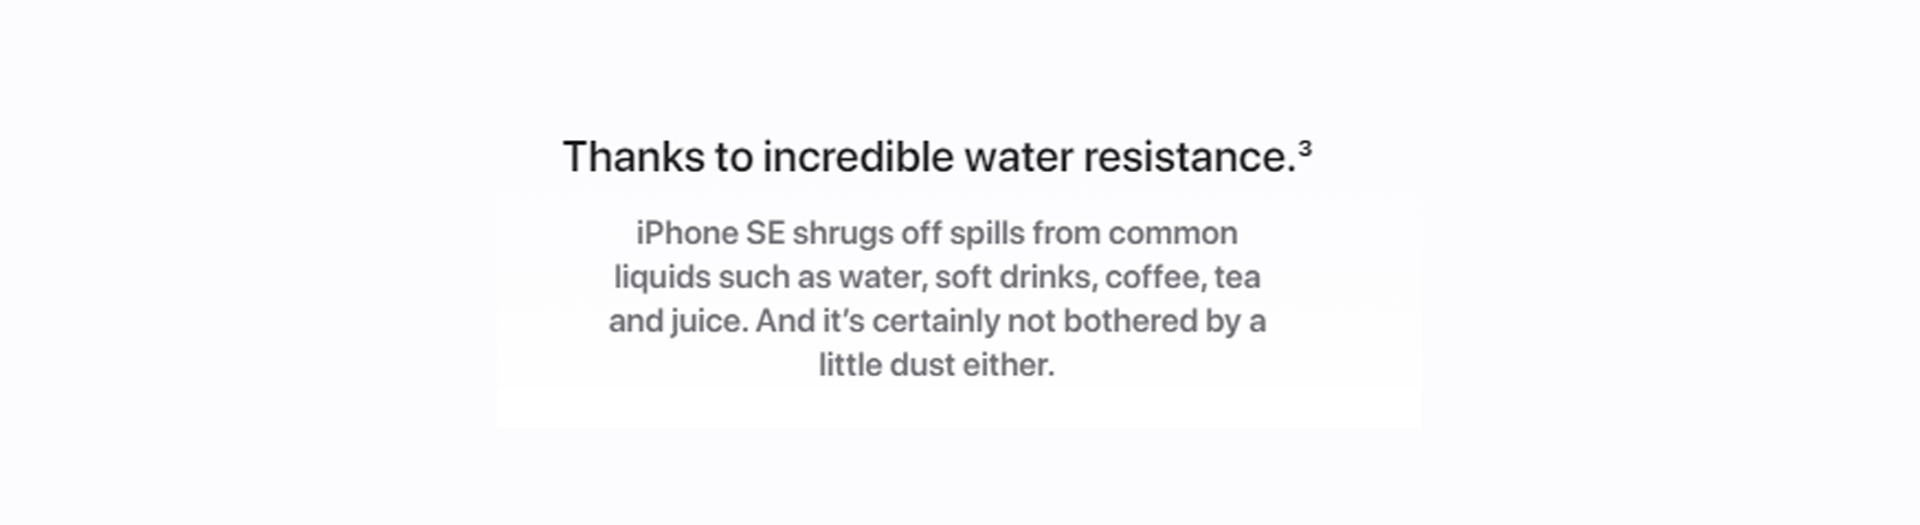 Thanks to Incredible Water Resistance